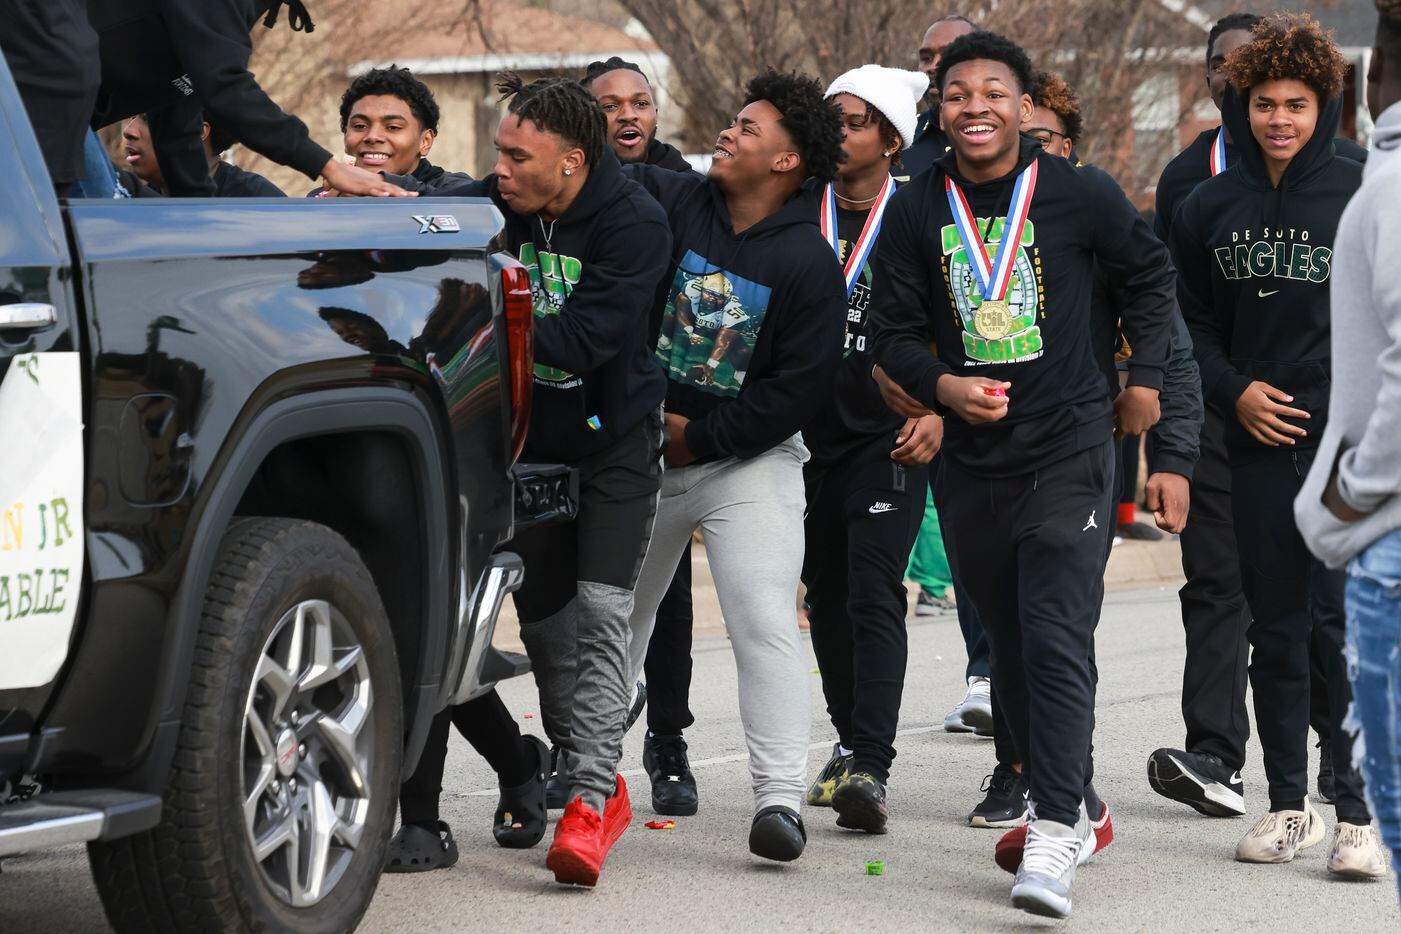 DeSoto High School football players walk down the street near the end of the parade,...